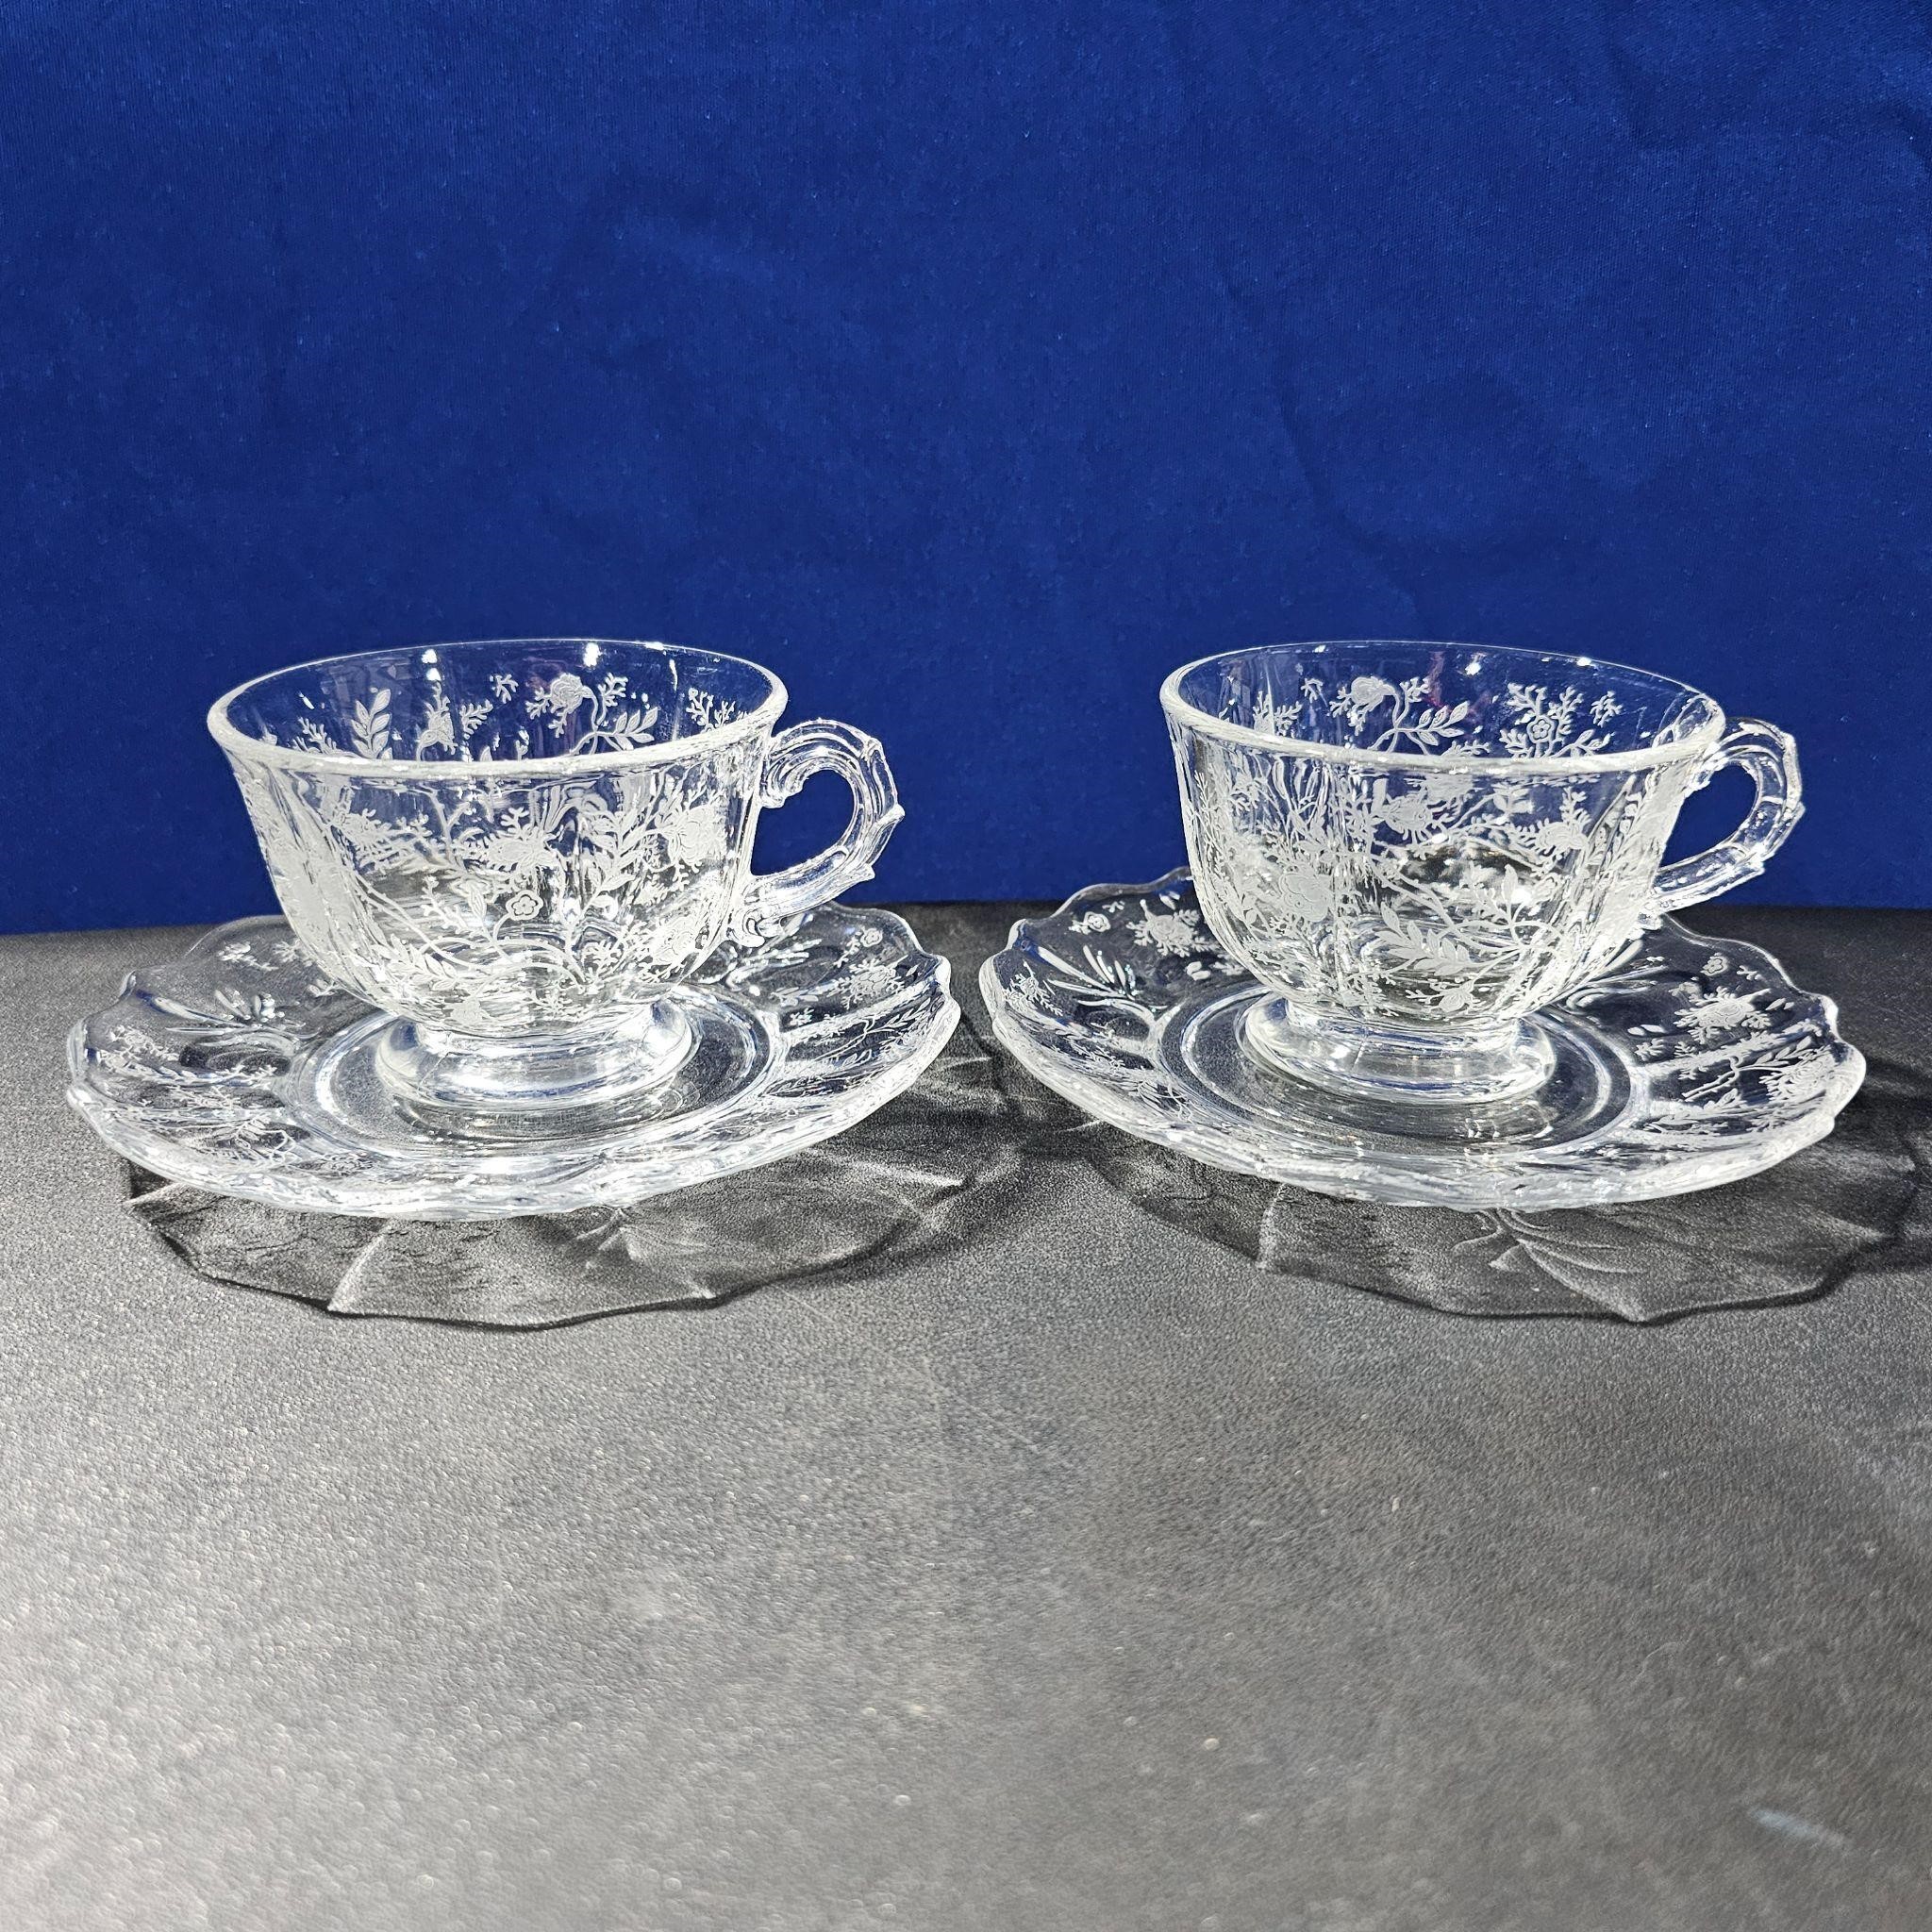 High-End Glass Online Auction (6)